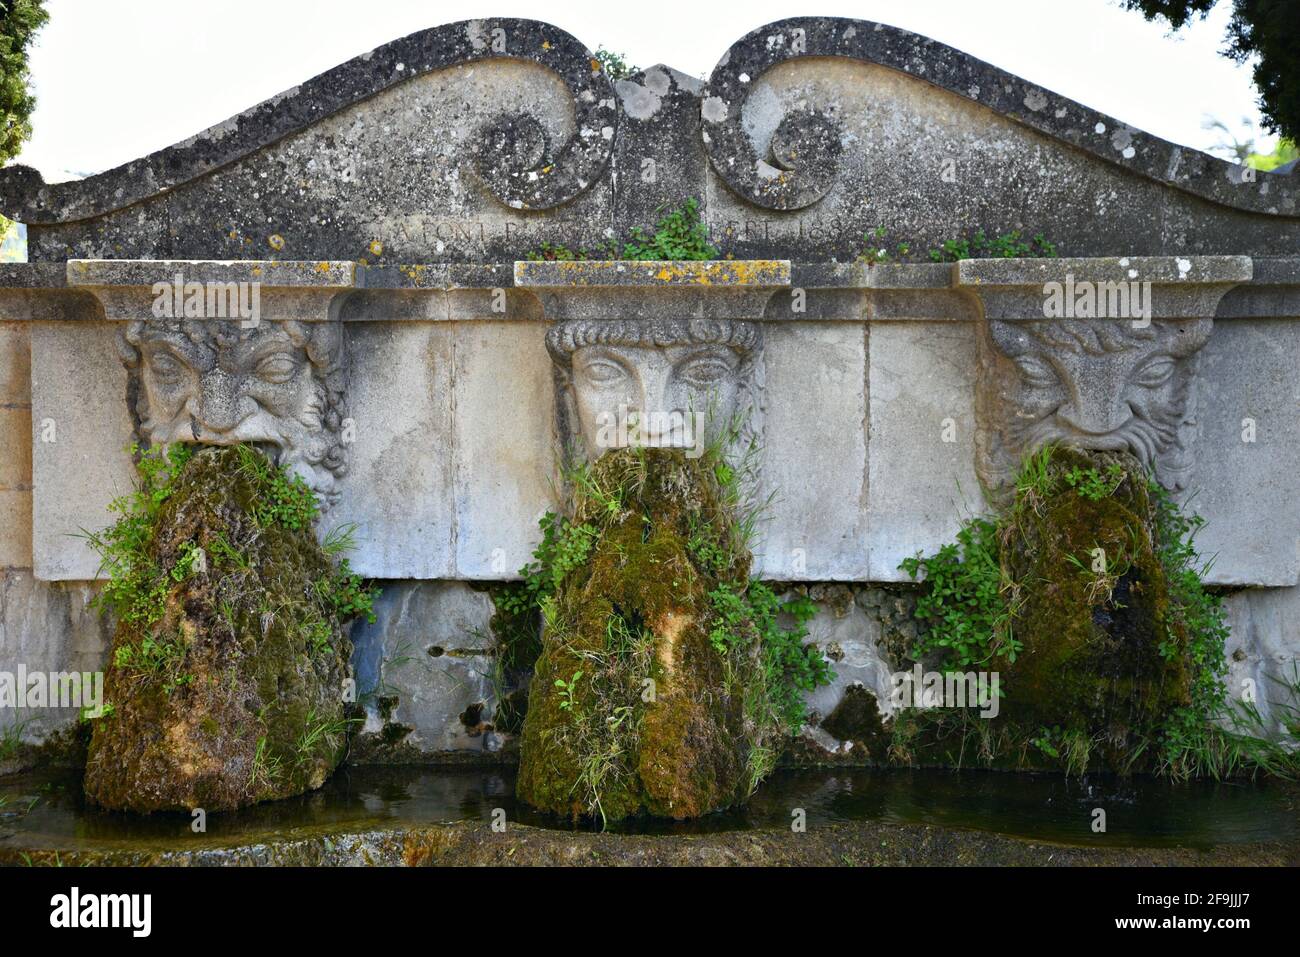 Antique stone and marble water fountain in the picturesque village of Lourmarin in Vaucluse, Provence France. Stock Photo